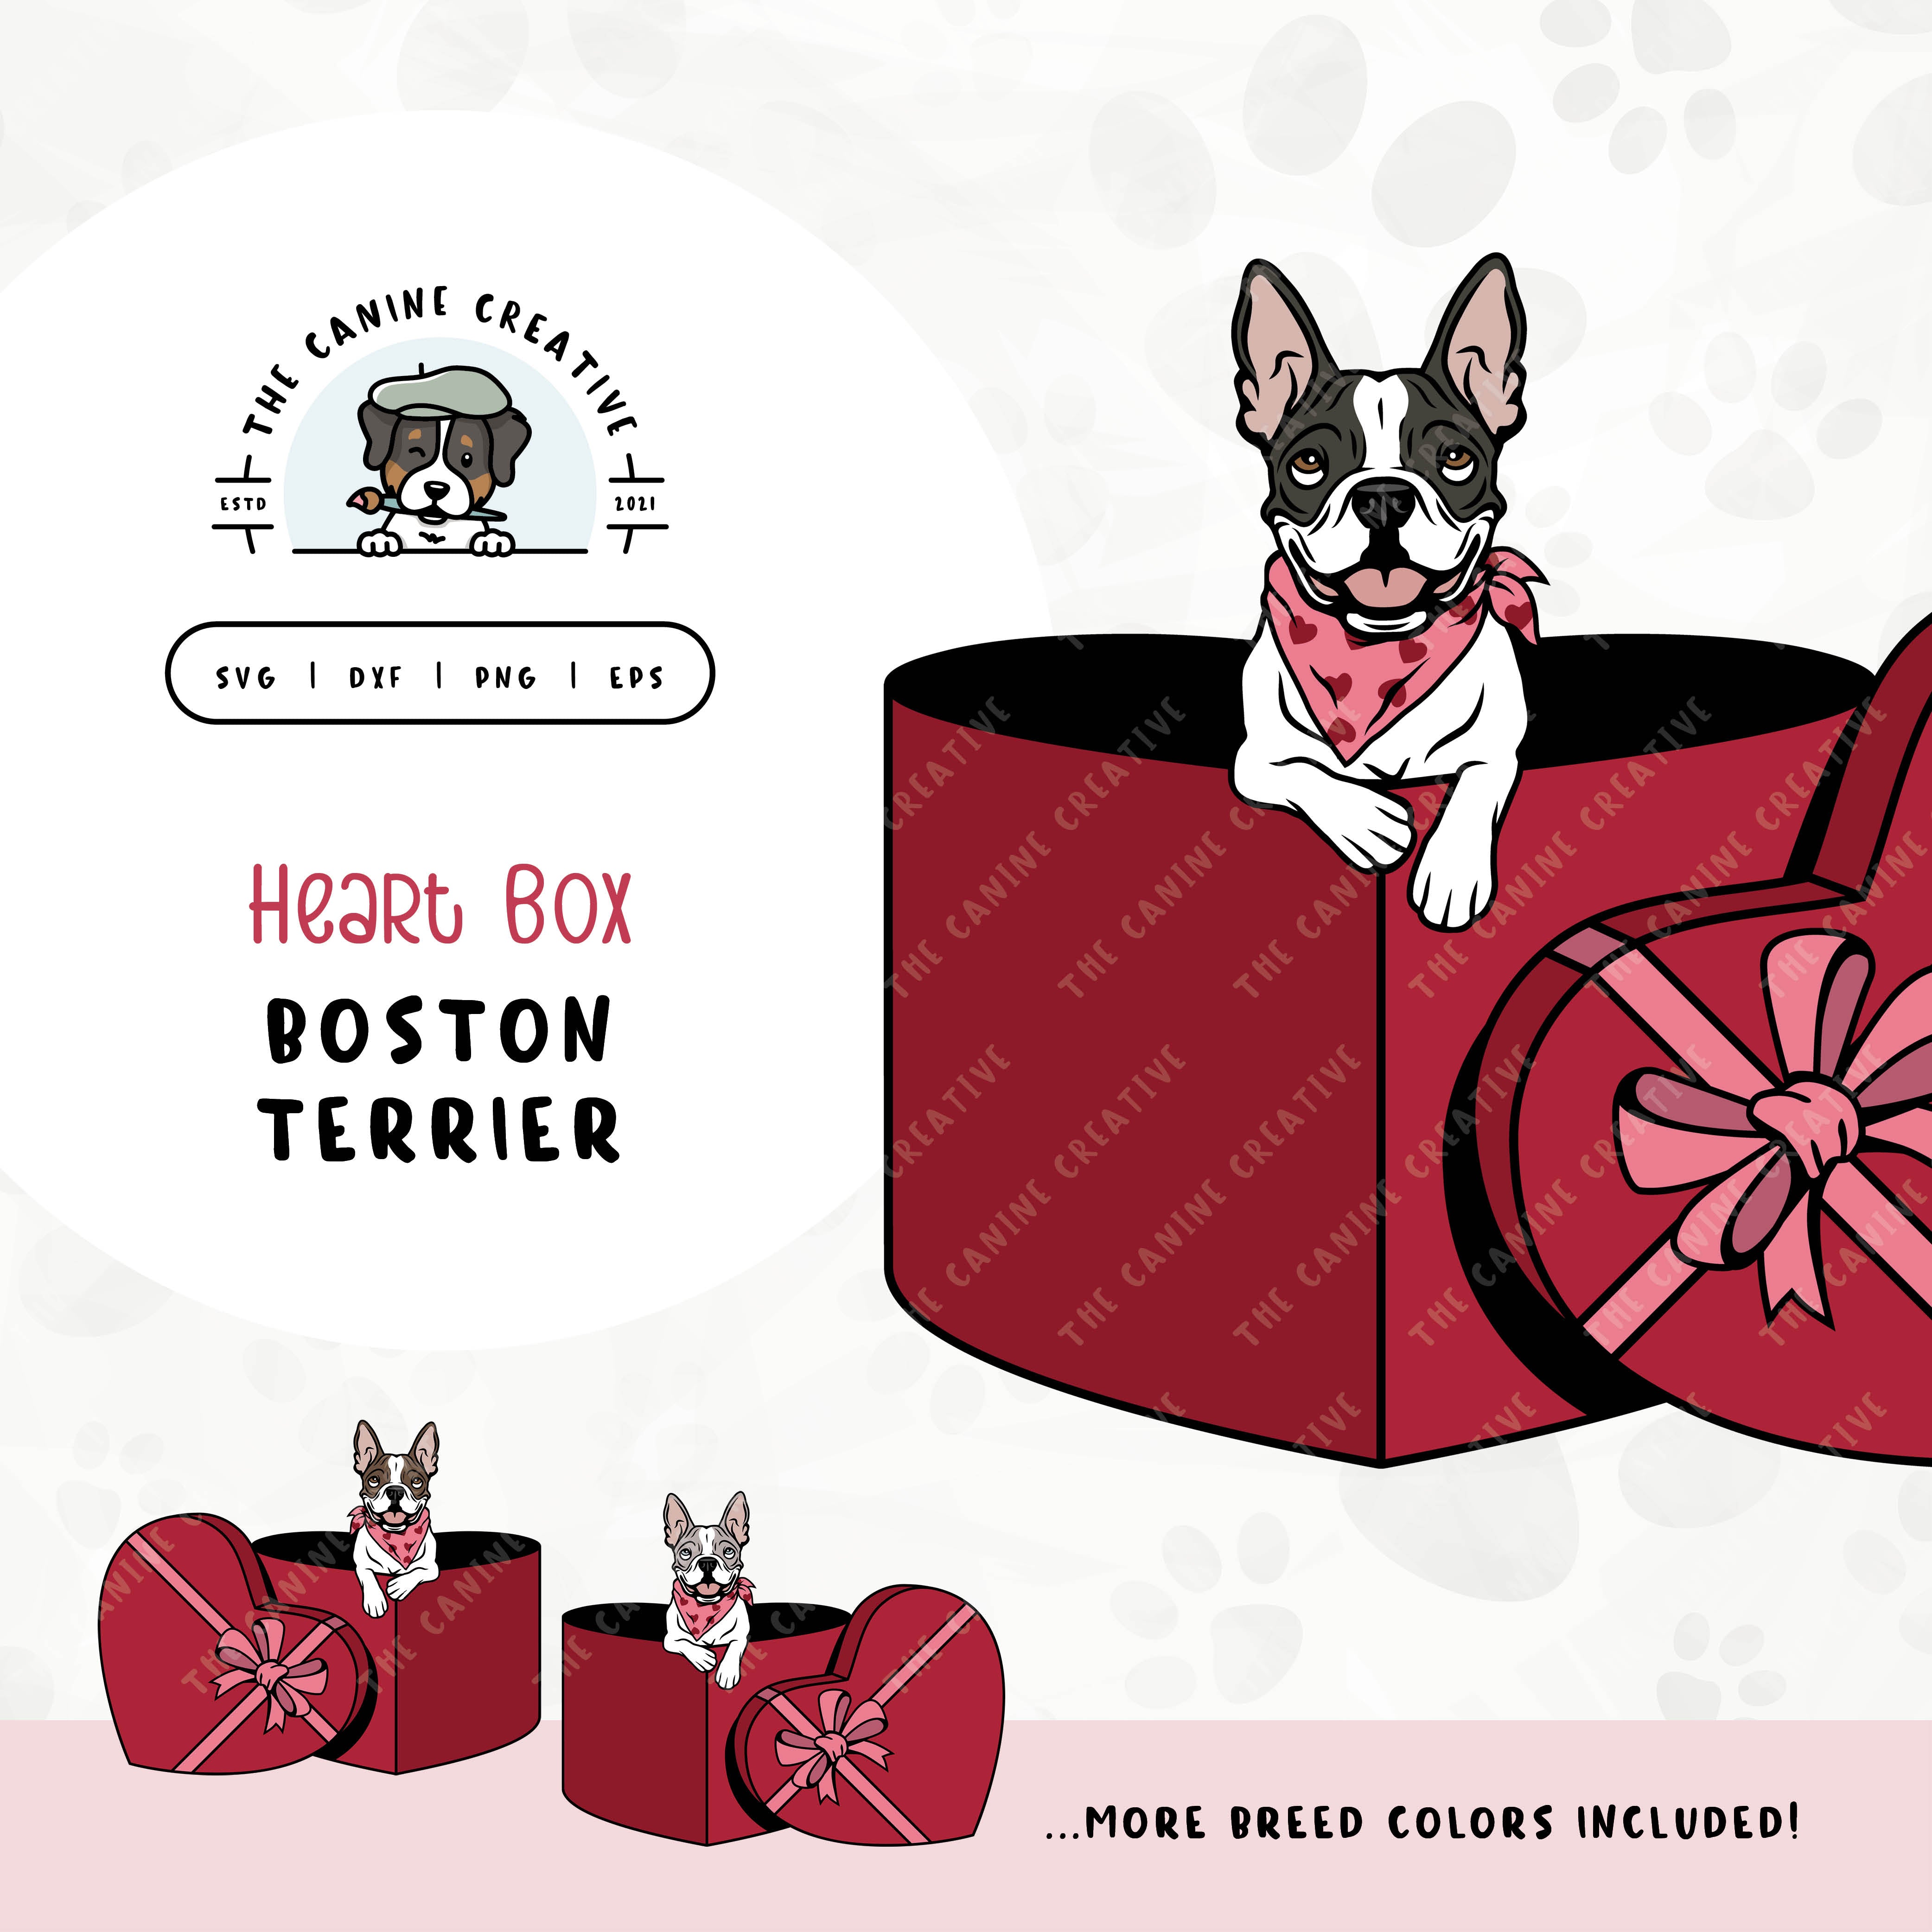 This charming Boston Terrier illustration features a peeking dog in a heart-shaped box. File formats include: SVG, DXF, PNG, and EPS.